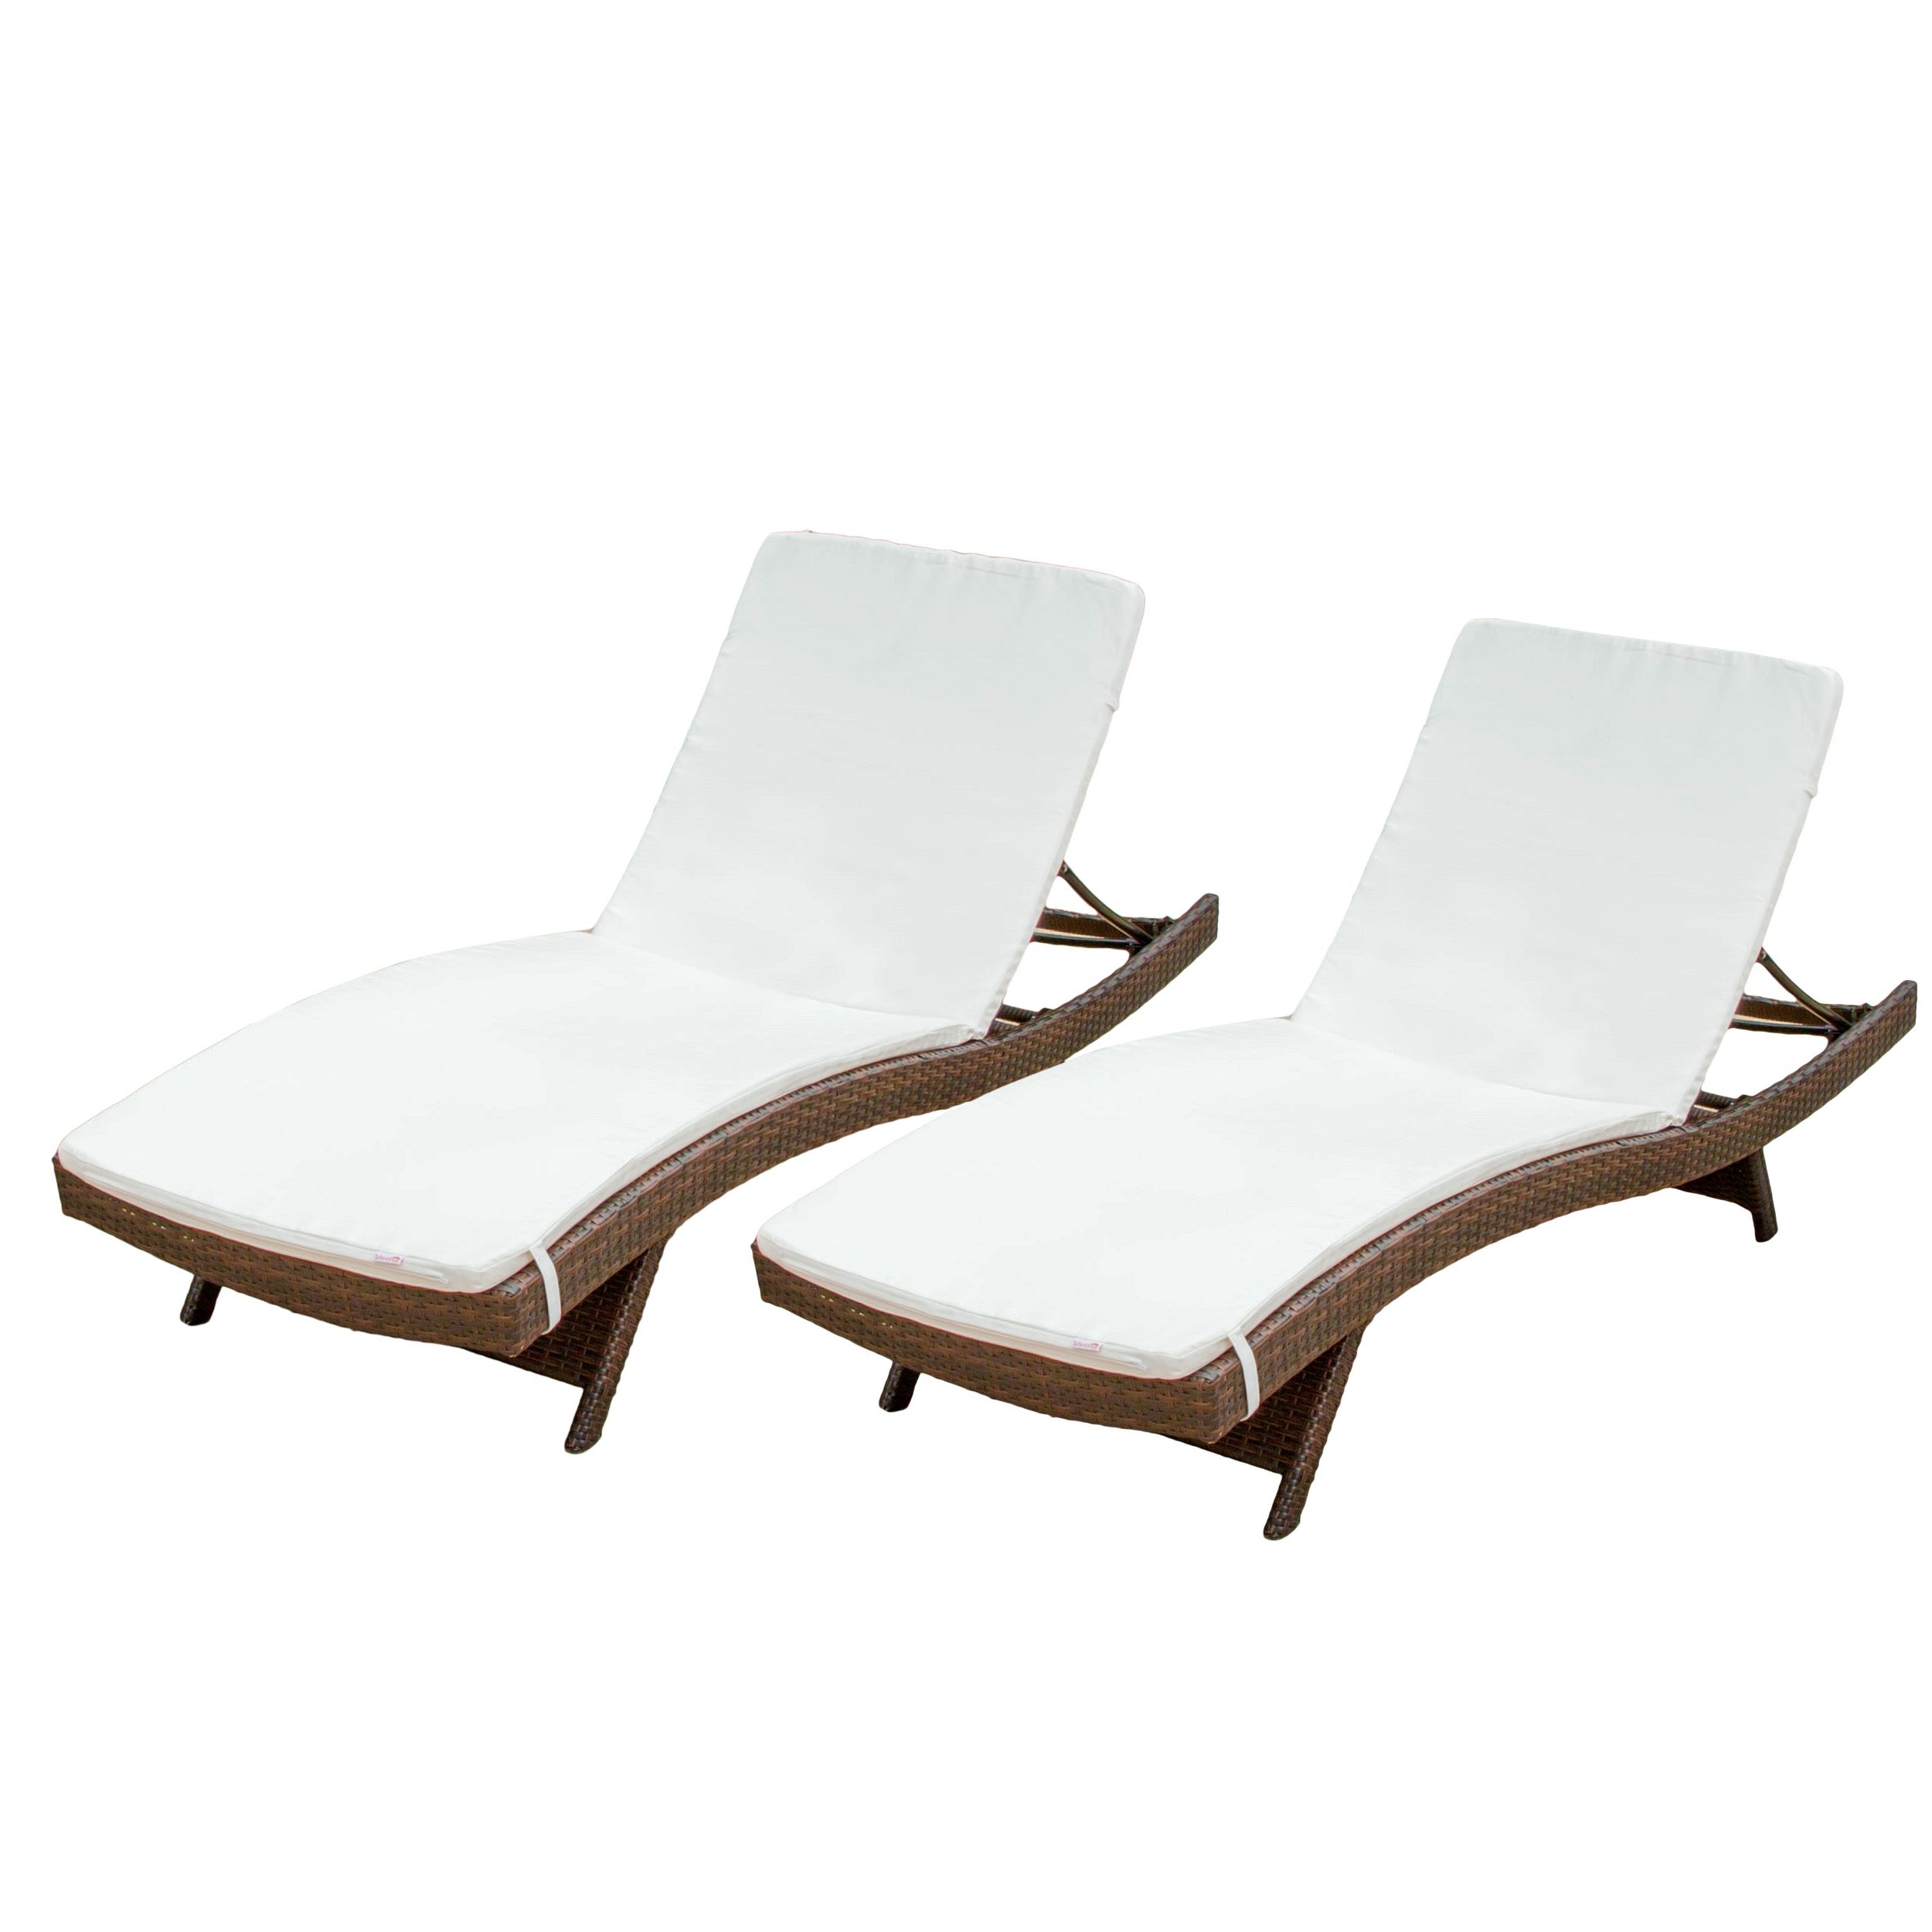 Wicker Adjustable Chaise Loungers With Cushion Throughout 2020 Outdoor Brown Wicker Adjustable Chaise Lounge With Cushions (set Of 2) (View 7 of 25)